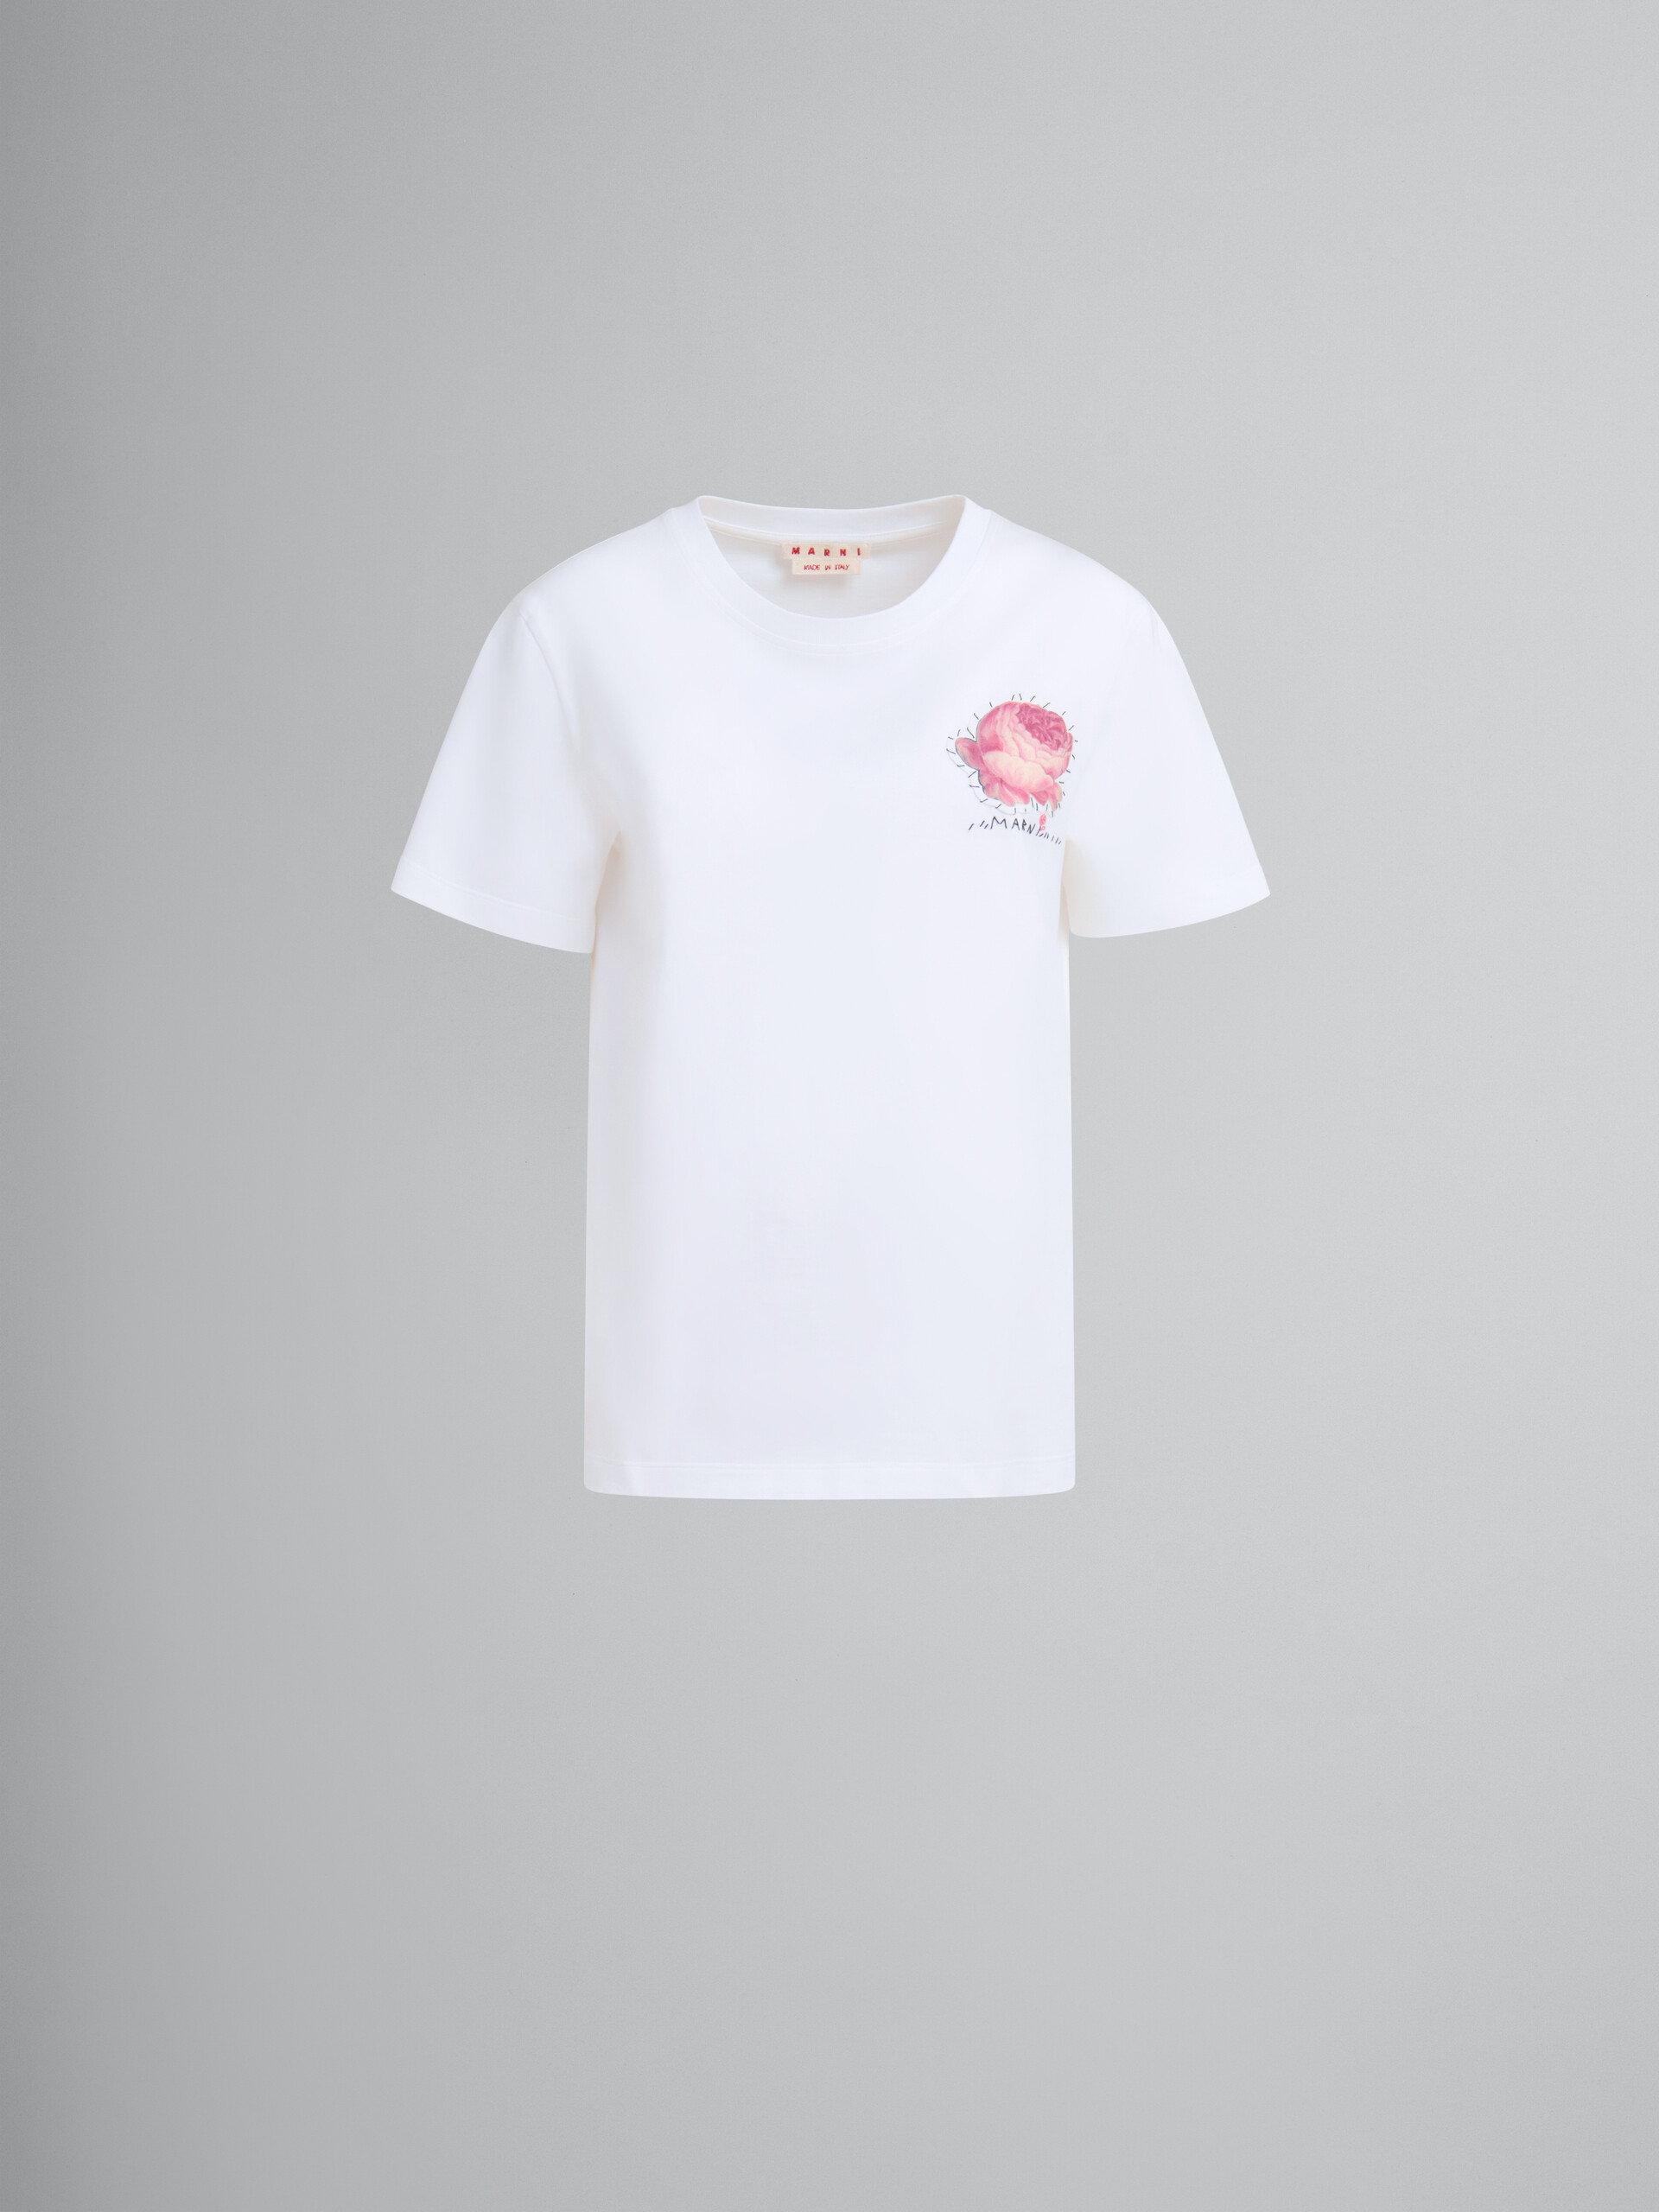 White organic jersey T-shirt with flower patch - T-shirts - Image 1